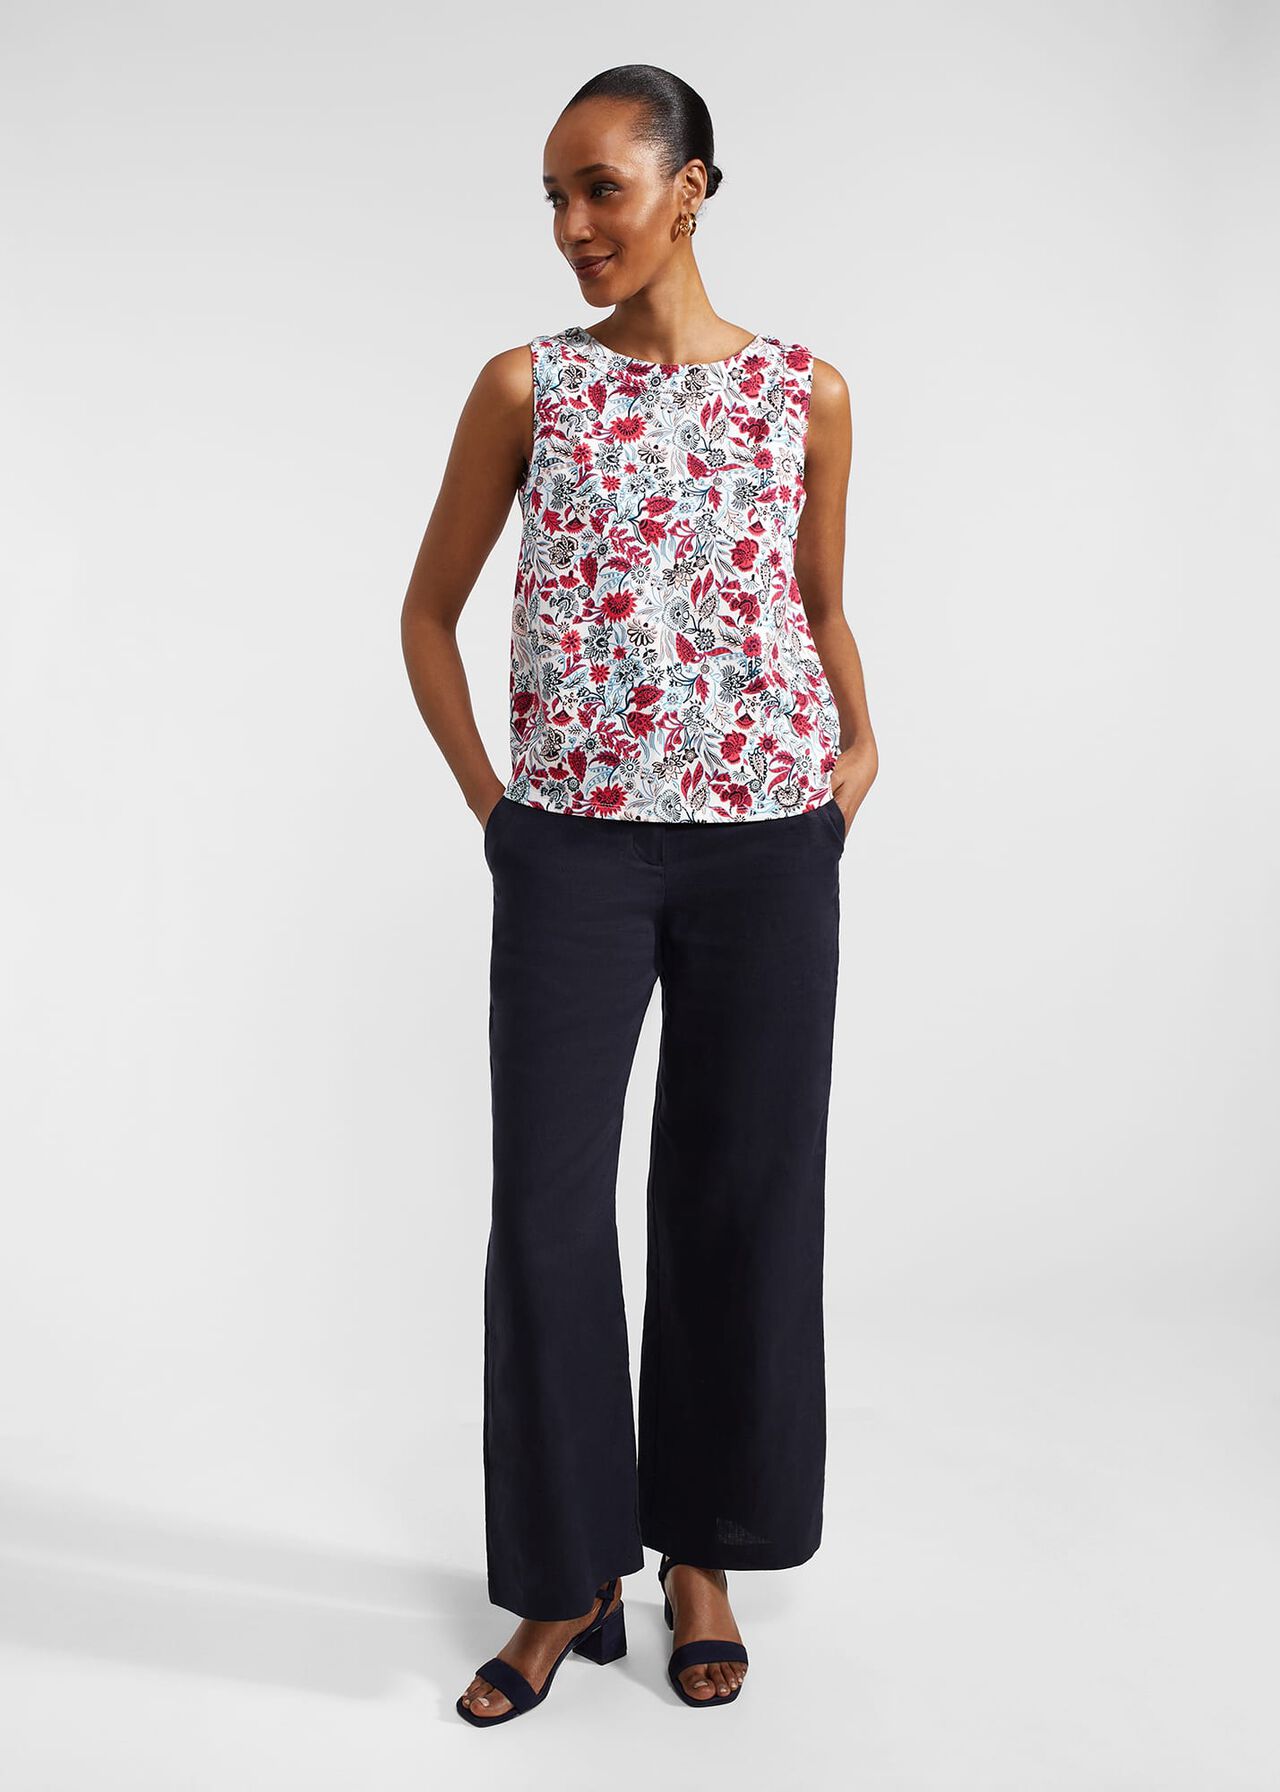 Maddy Cotton Printed Top, Multi Damask, hi-res